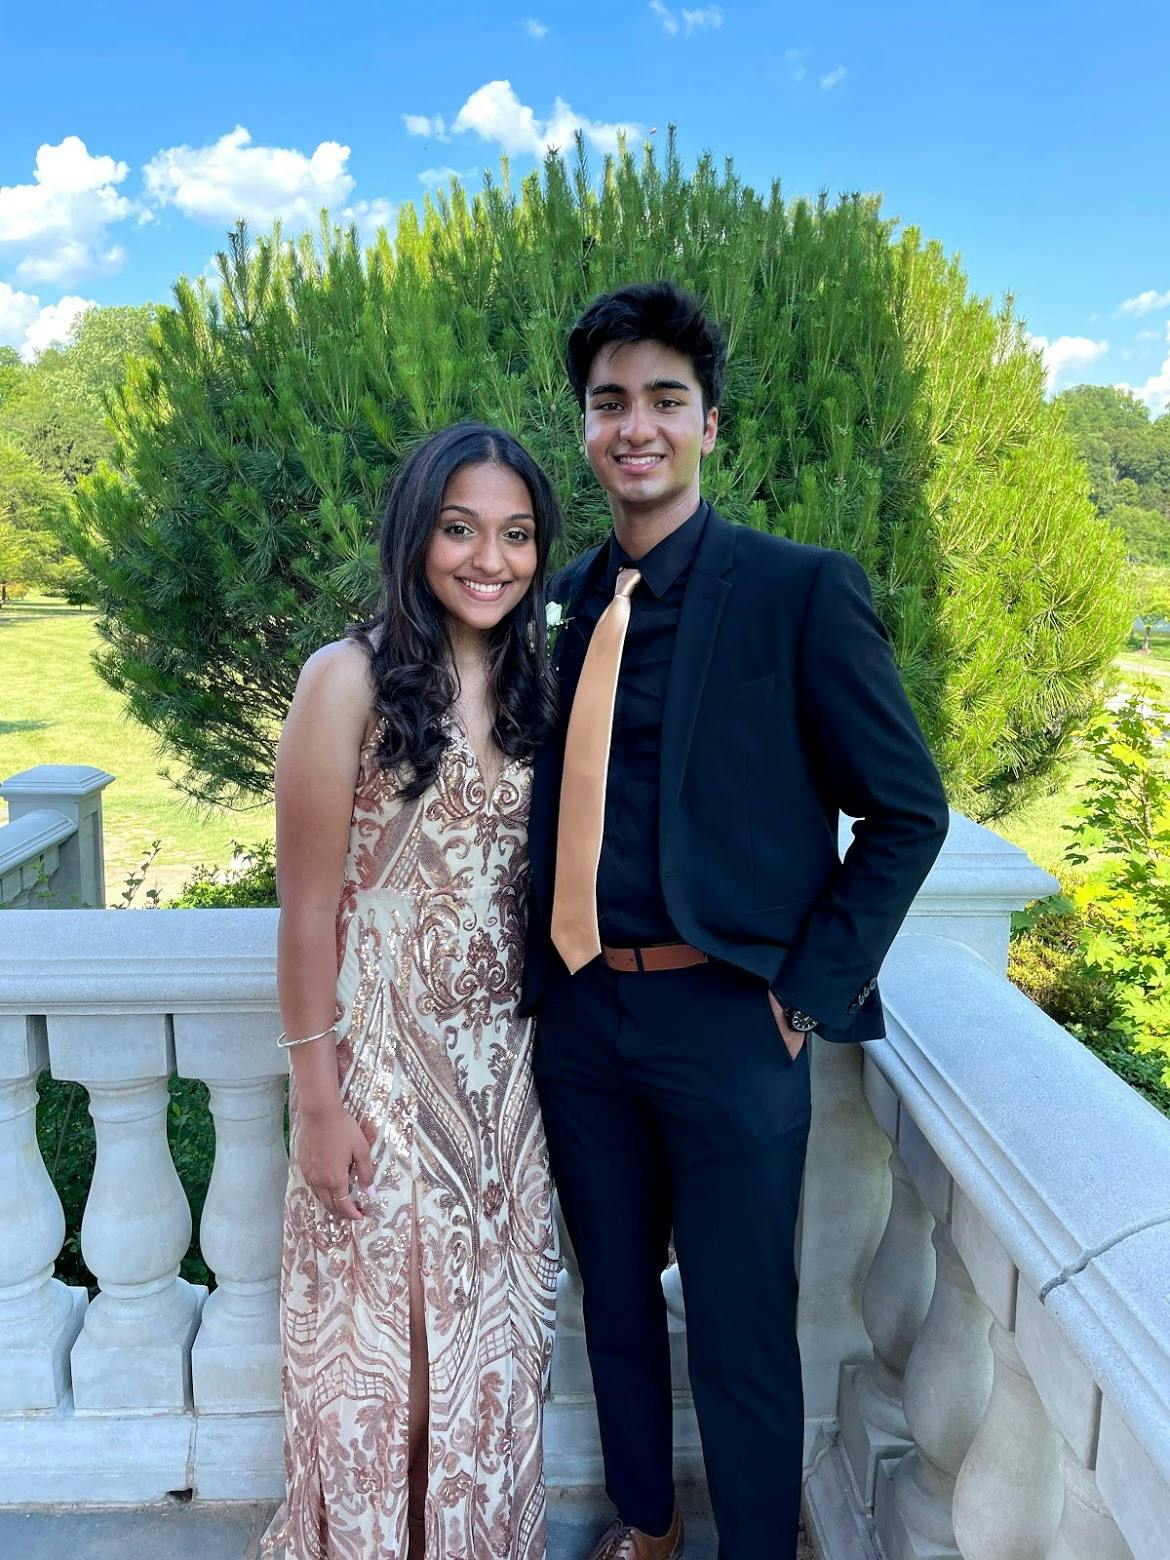 Fake prom pics in 80 degree weather🥵